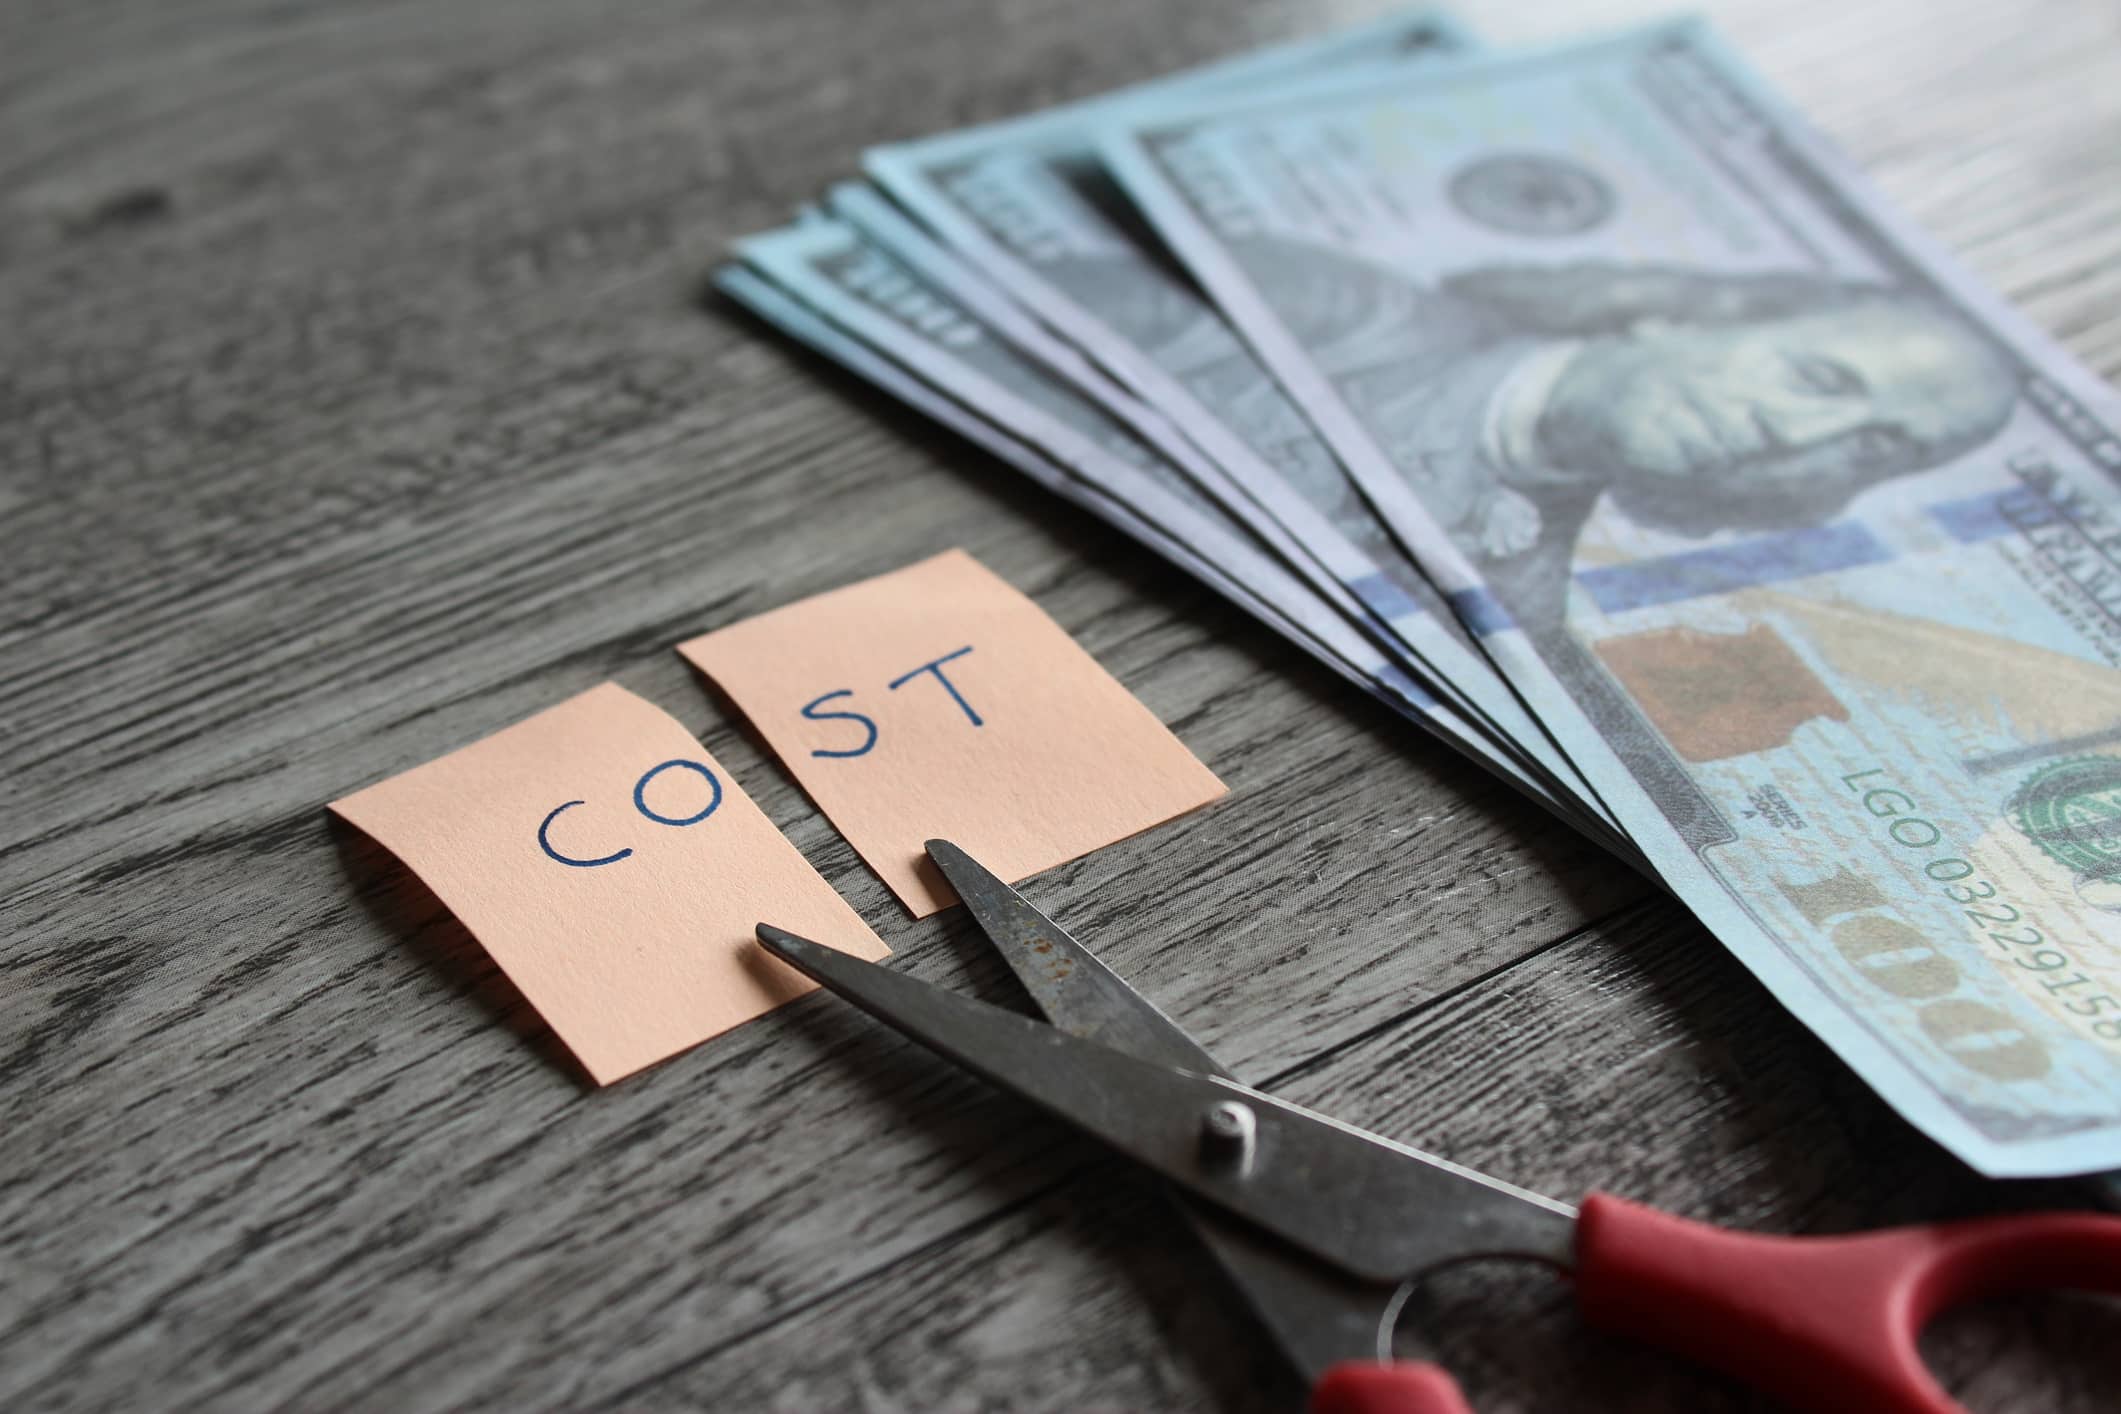 How to cut expenses. Scissor, money and note with text COST. Financial, cost cutting, reduce expenses concept